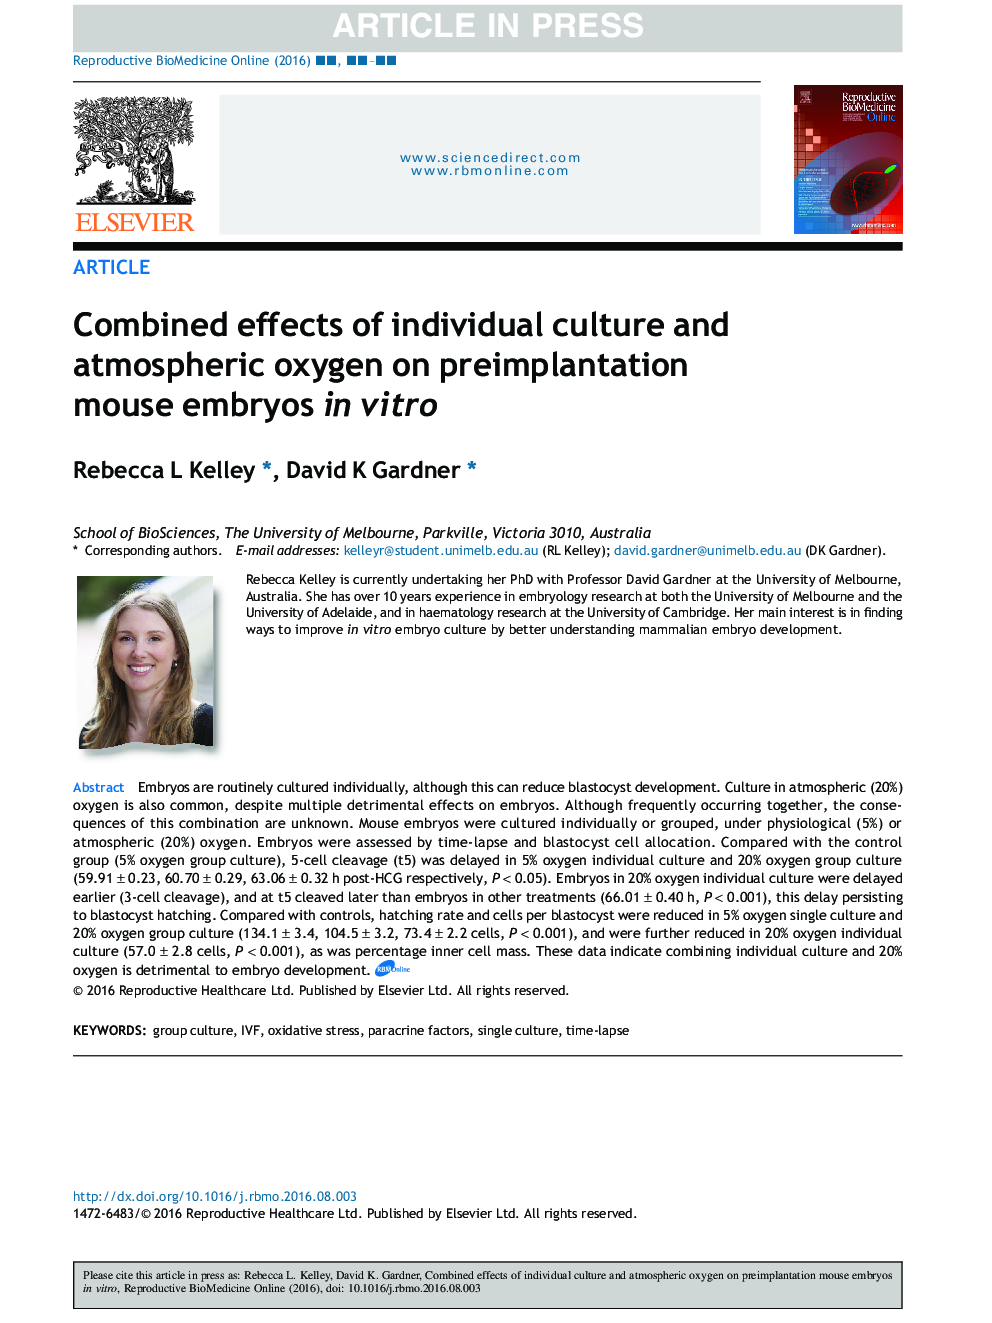 Combined effects of individual culture and atmospheric oxygen on preimplantation mouse embryos in vitro